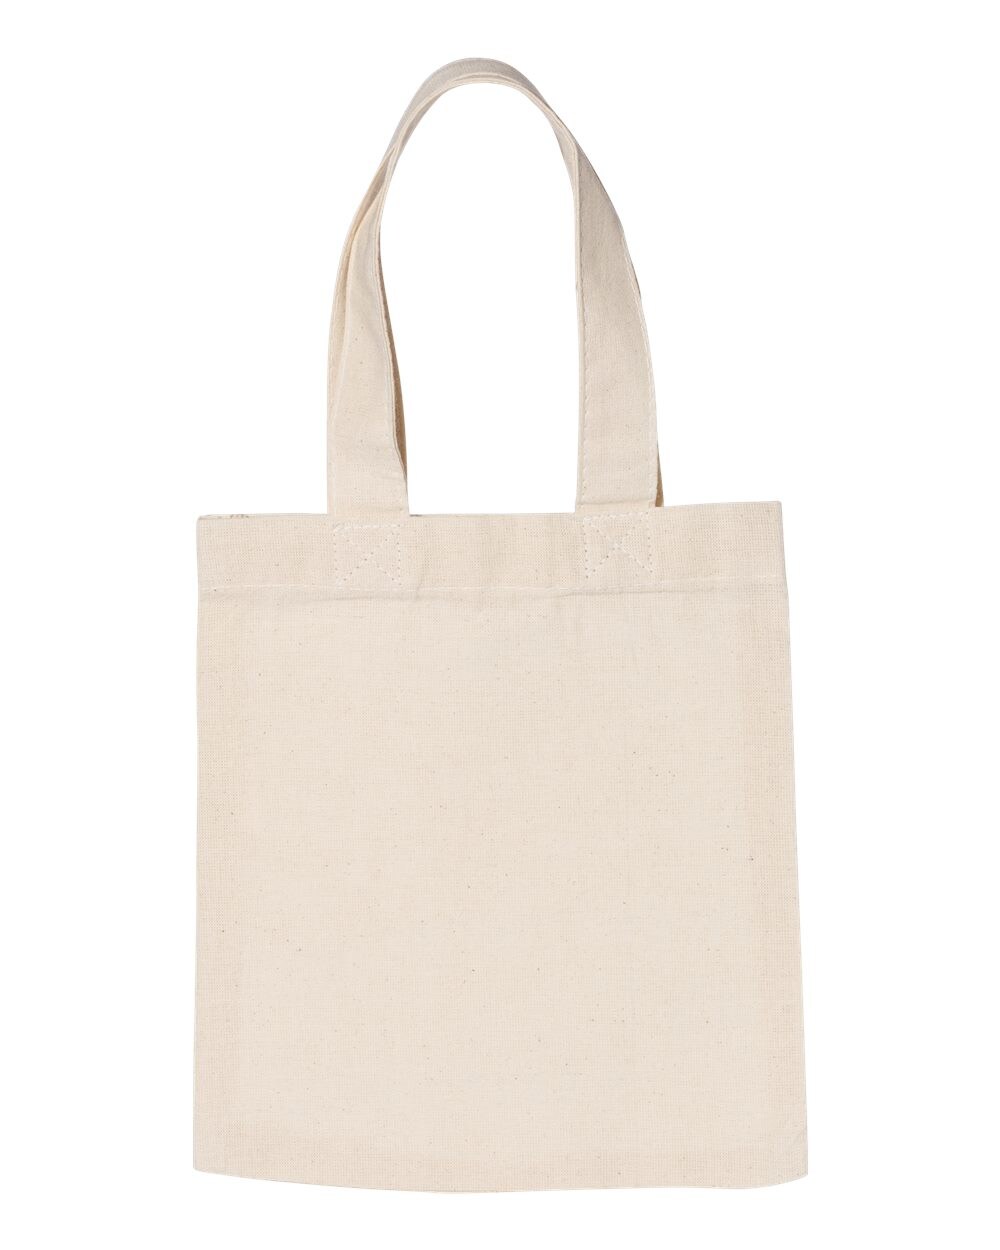 OAD® - Small Canvas Tote - OAD115 | 6 oz./lyd, 100% cotton canvas